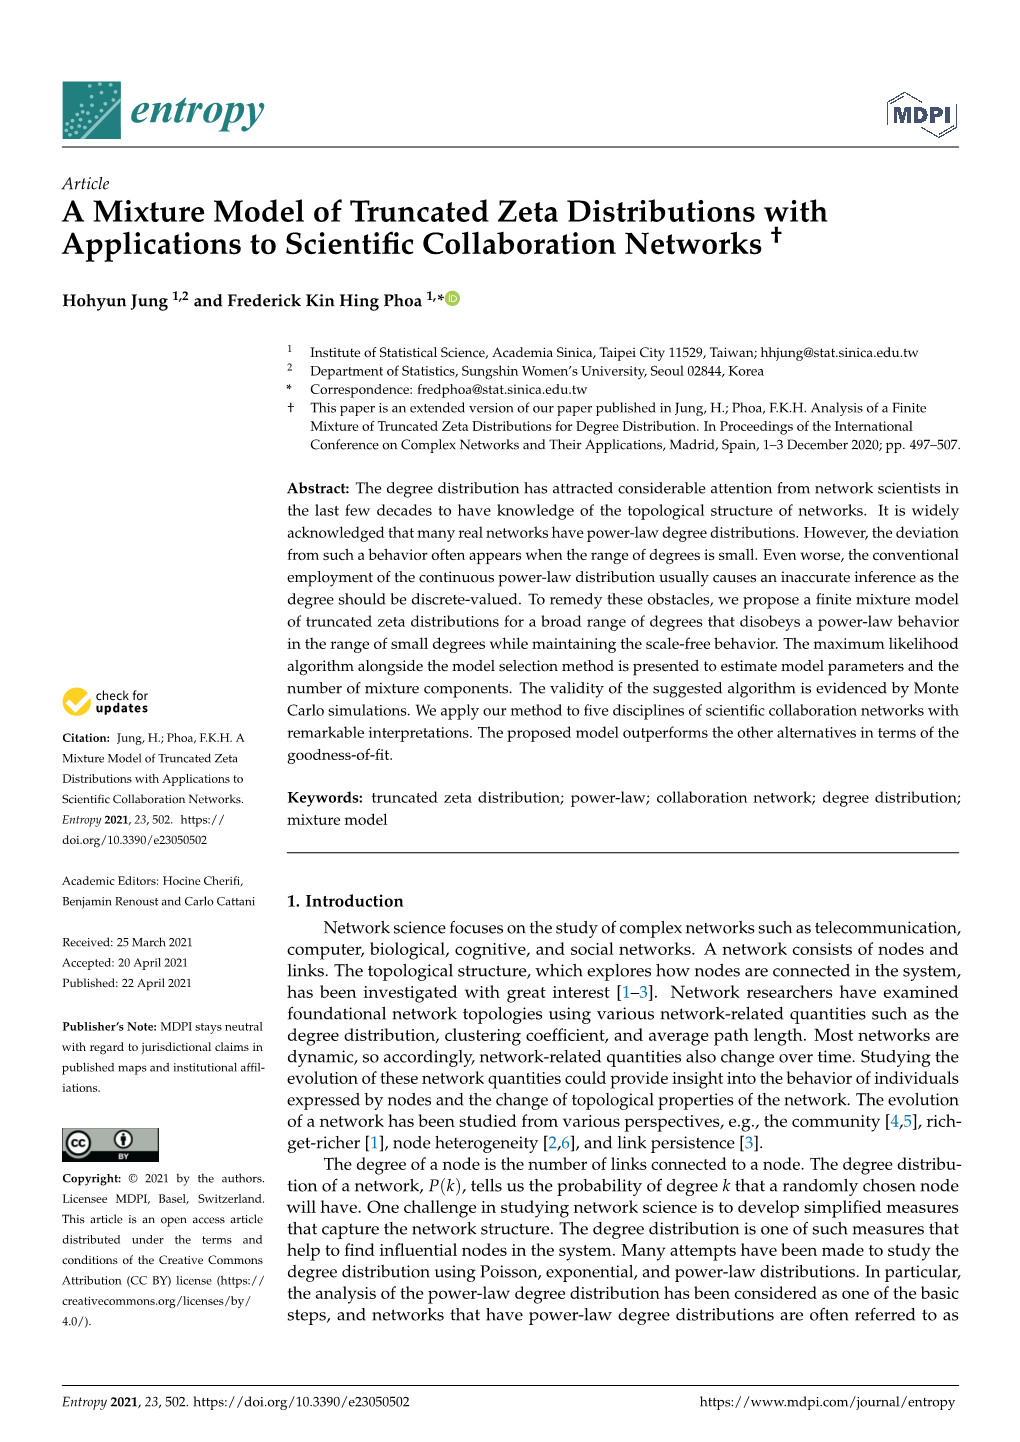 A Mixture Model of Truncated Zeta Distributions with Applications to Scientiﬁc Collaboration Networks †